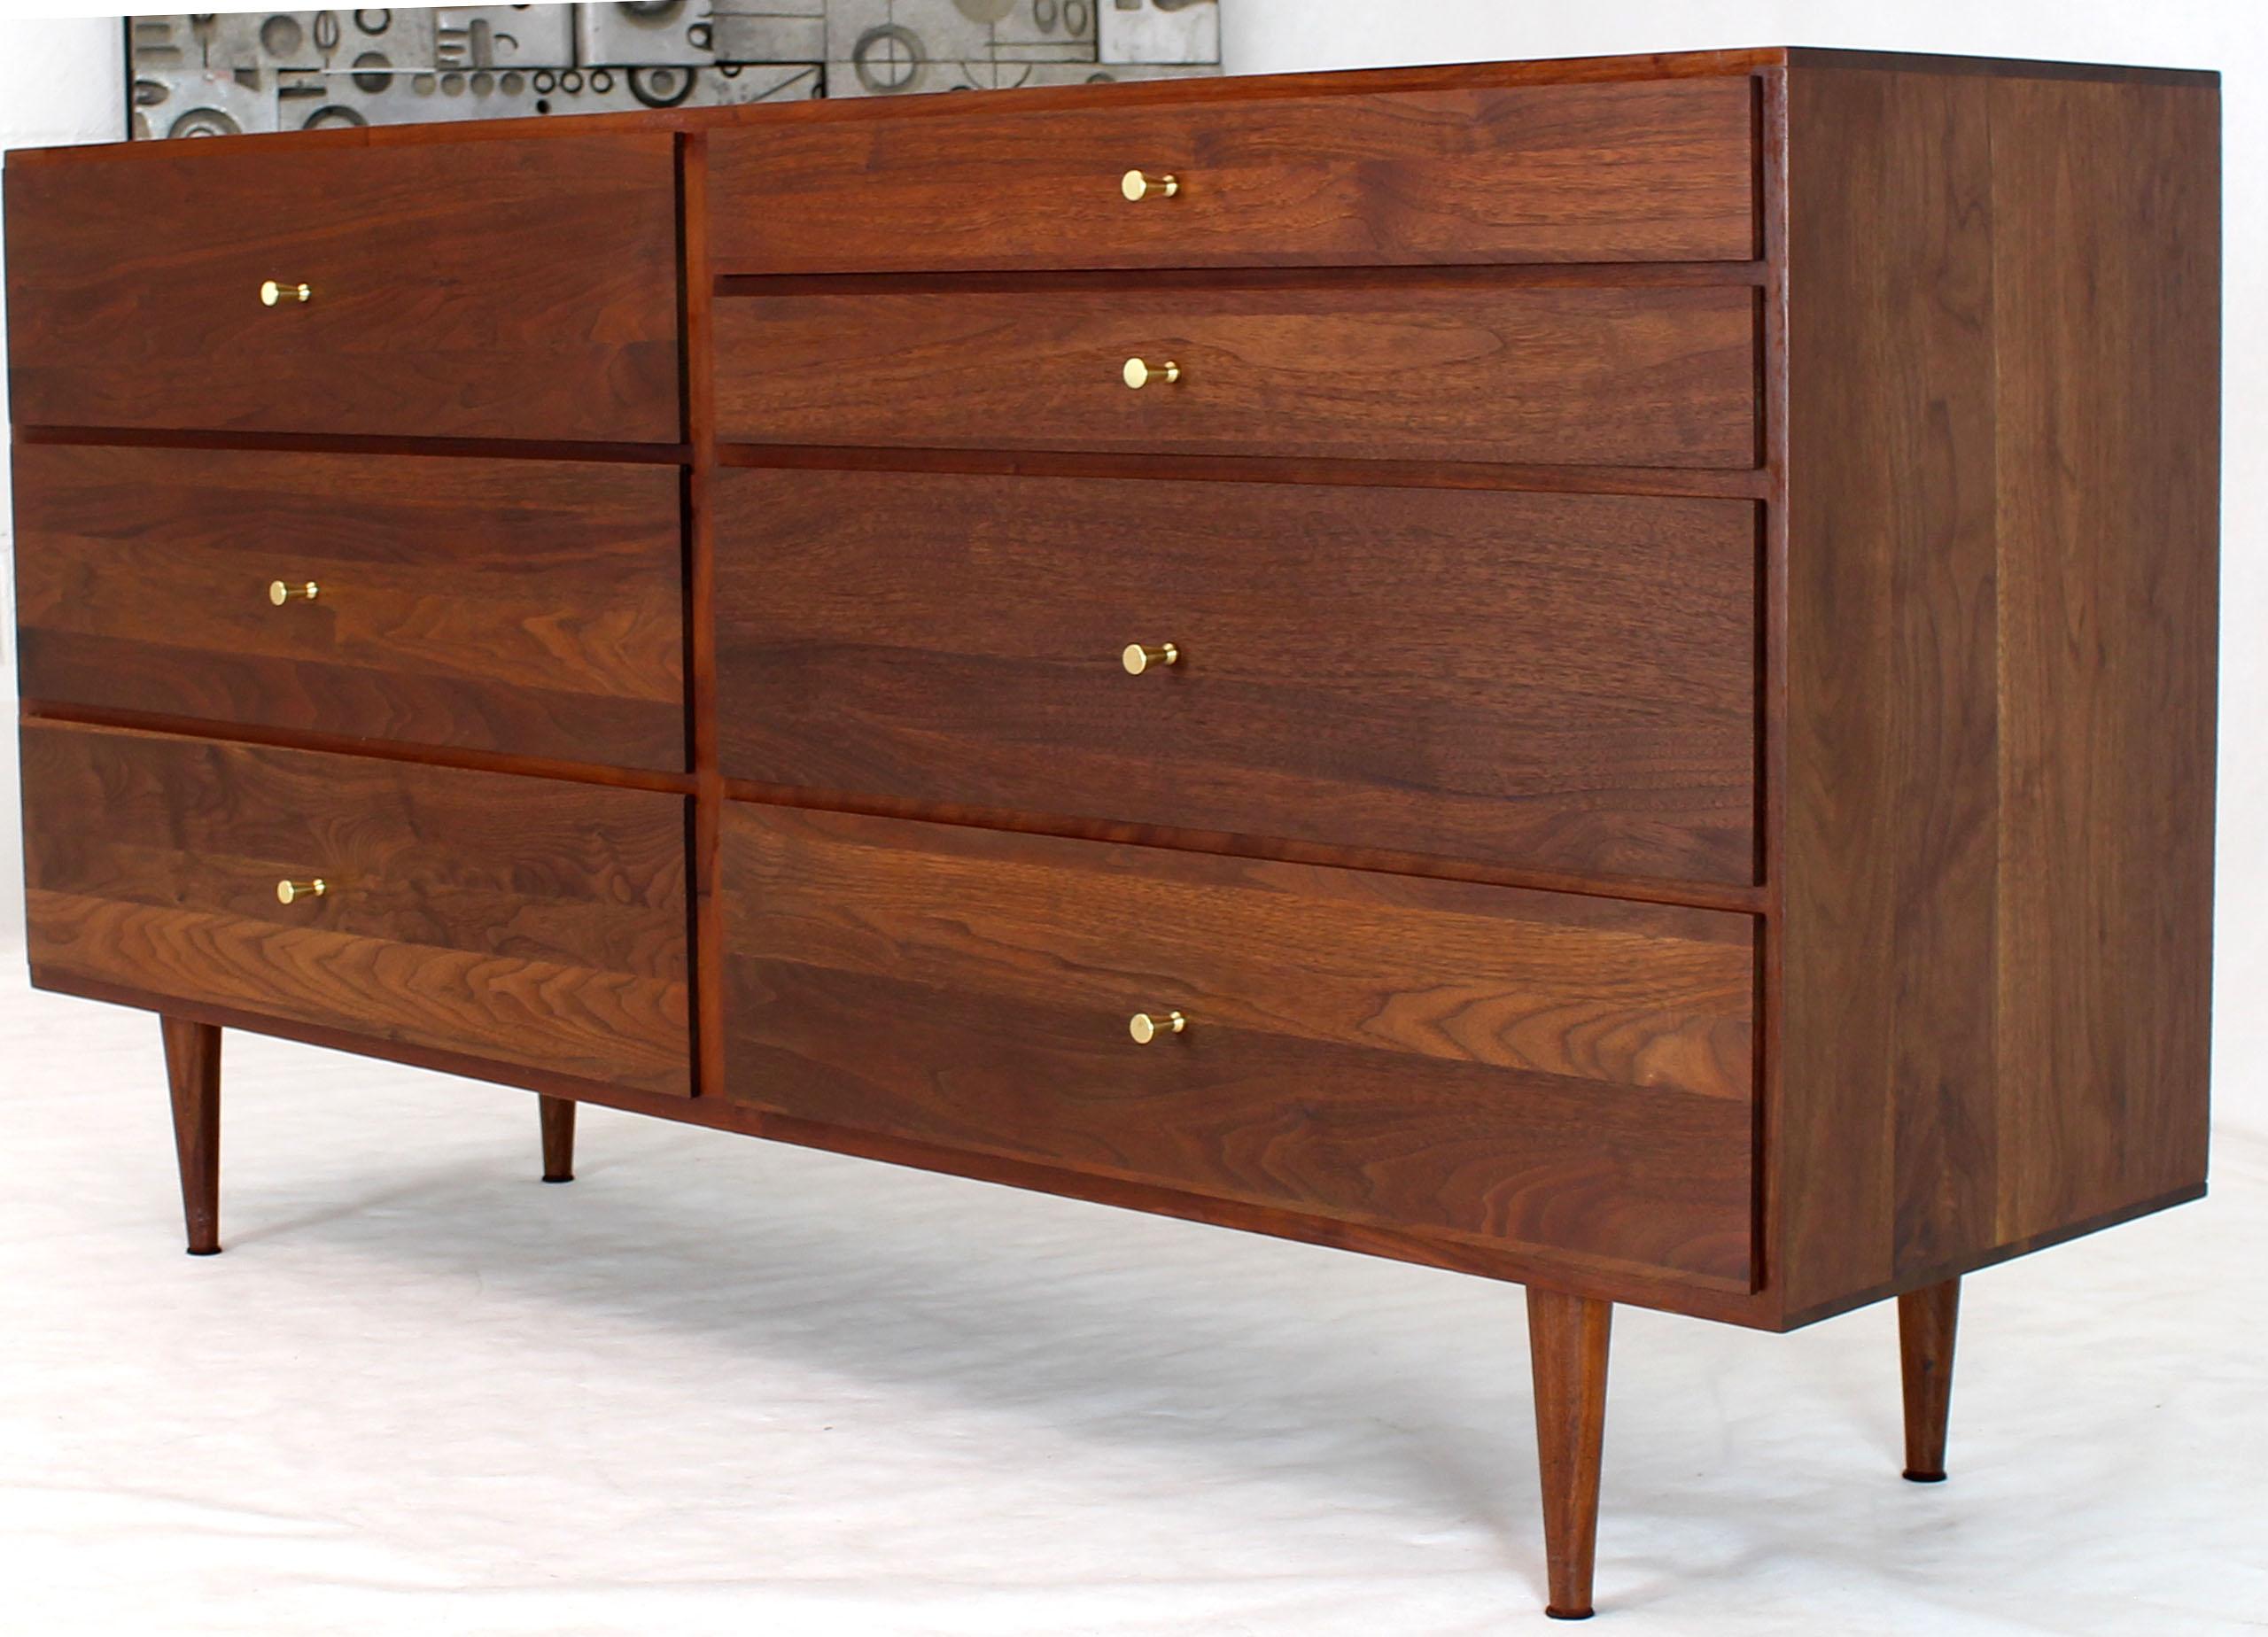 Solid Oiled Walnut Seven Drawers Double Dresser Brass Pulls Tapered Legs 1